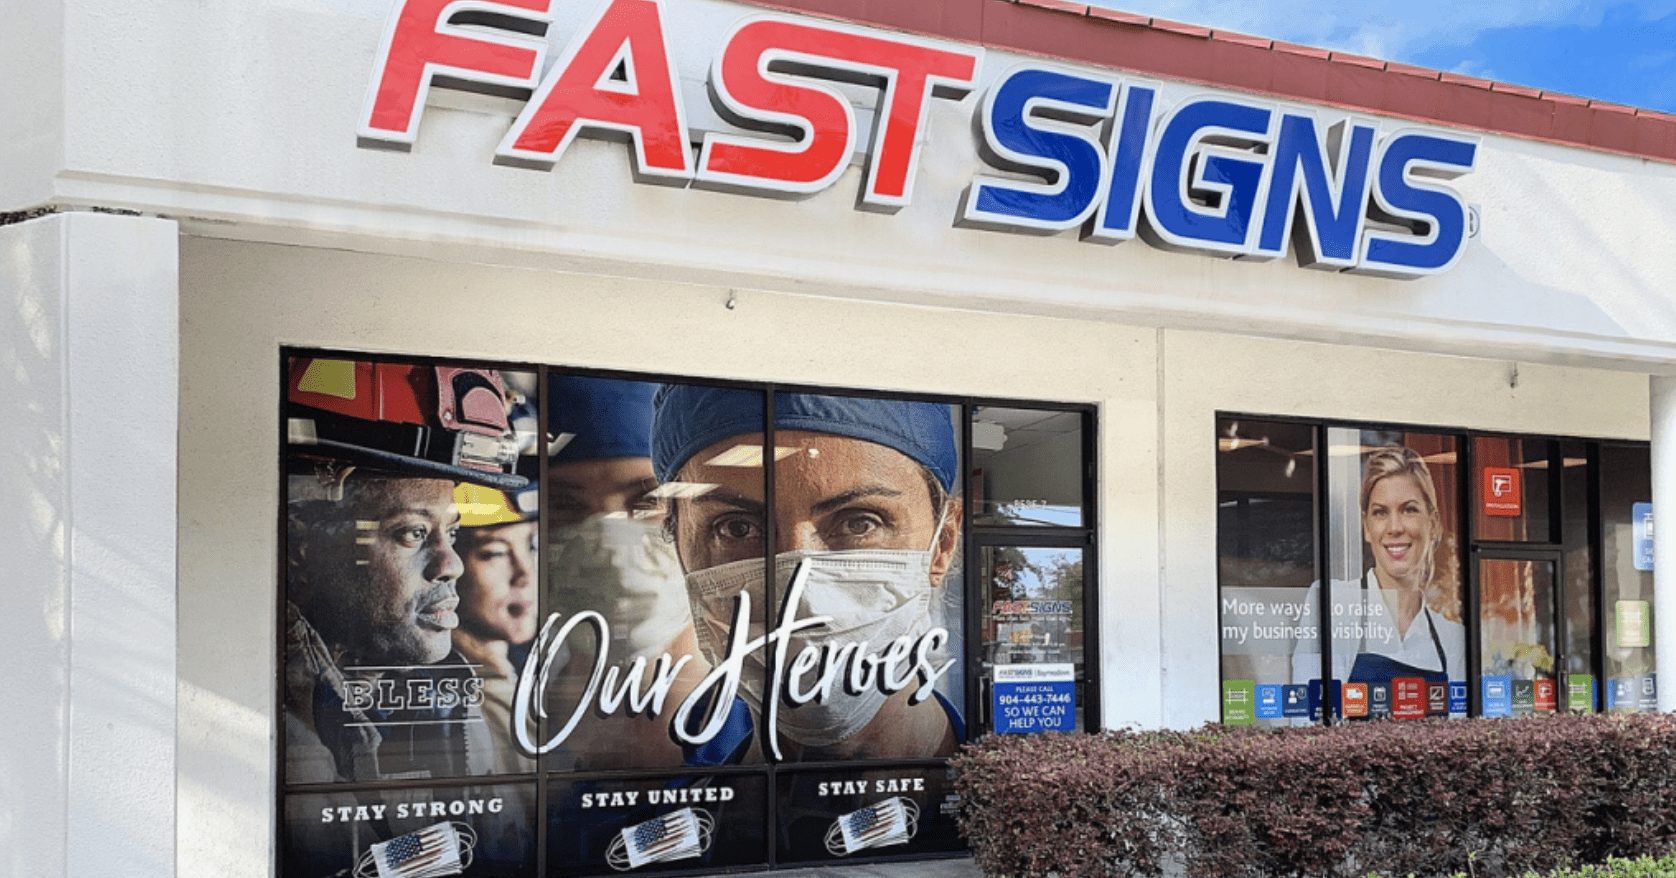 Couple Expands FastSigns Franchise to 5th DFW Location